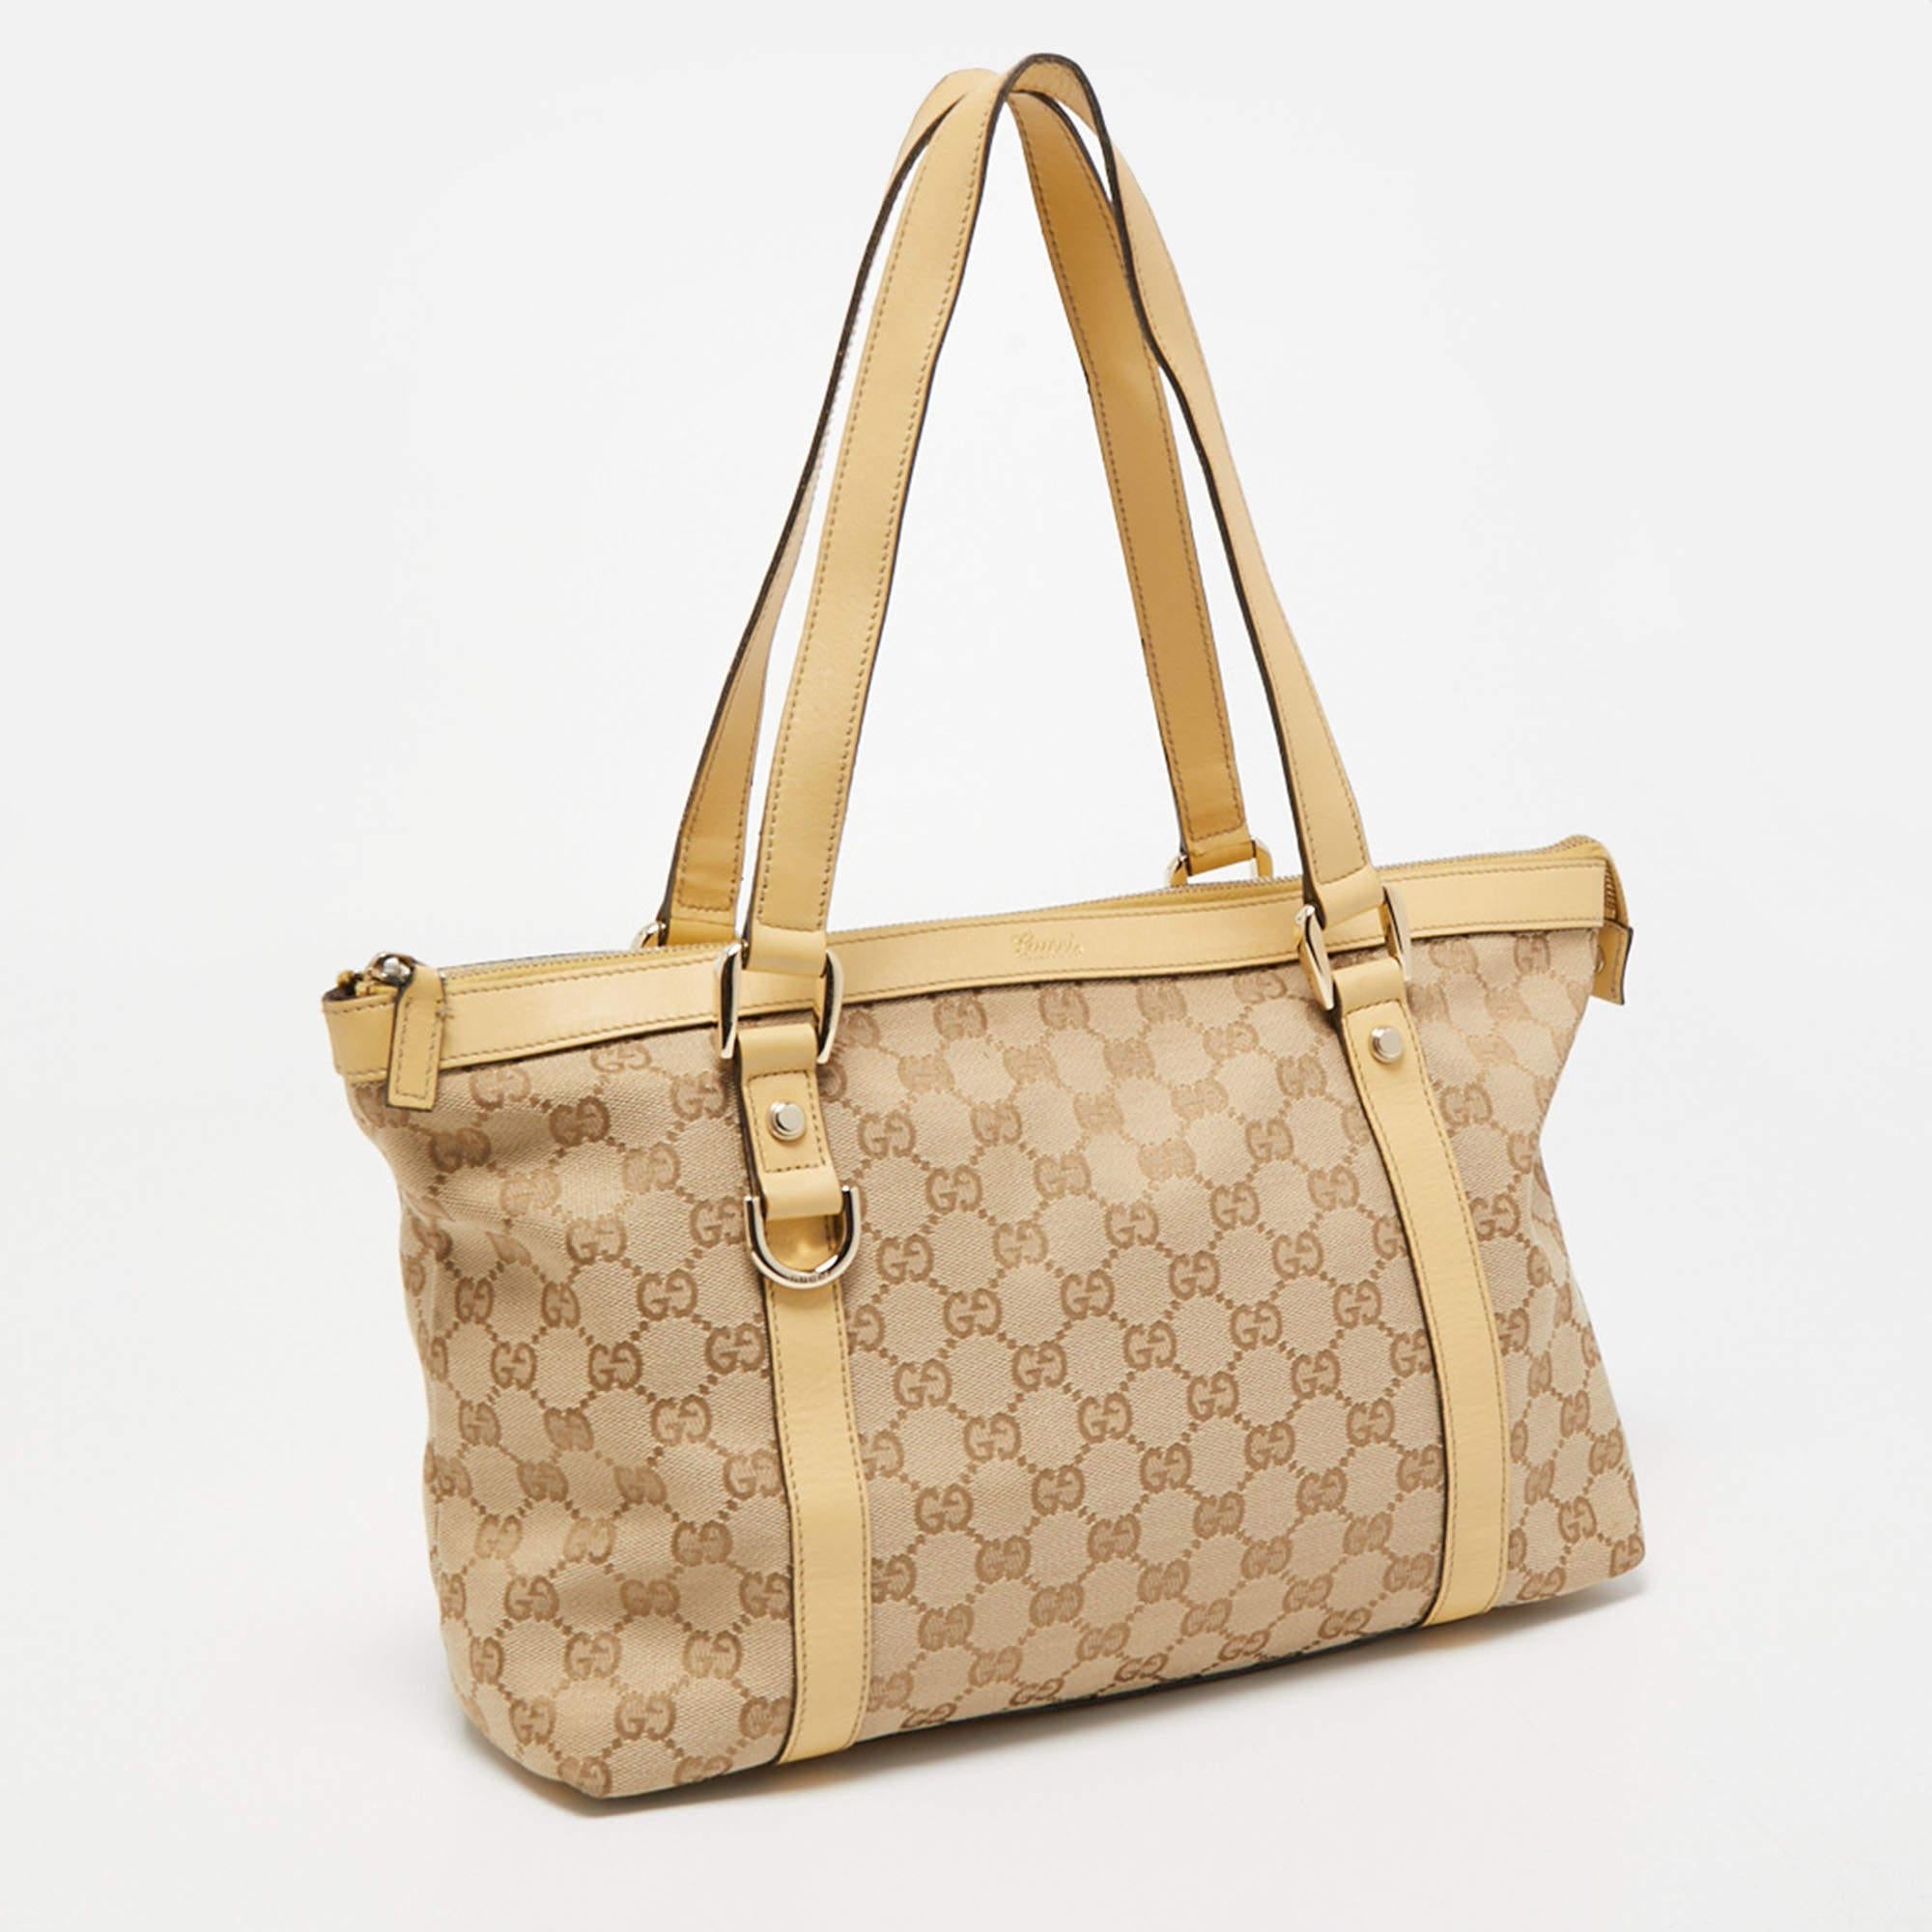 Be it your daily commute to work, shopping sprees, and vacations, a Gucci tote will never fail you. This designer creation is made to last and assist you in your fashion-filled days.

